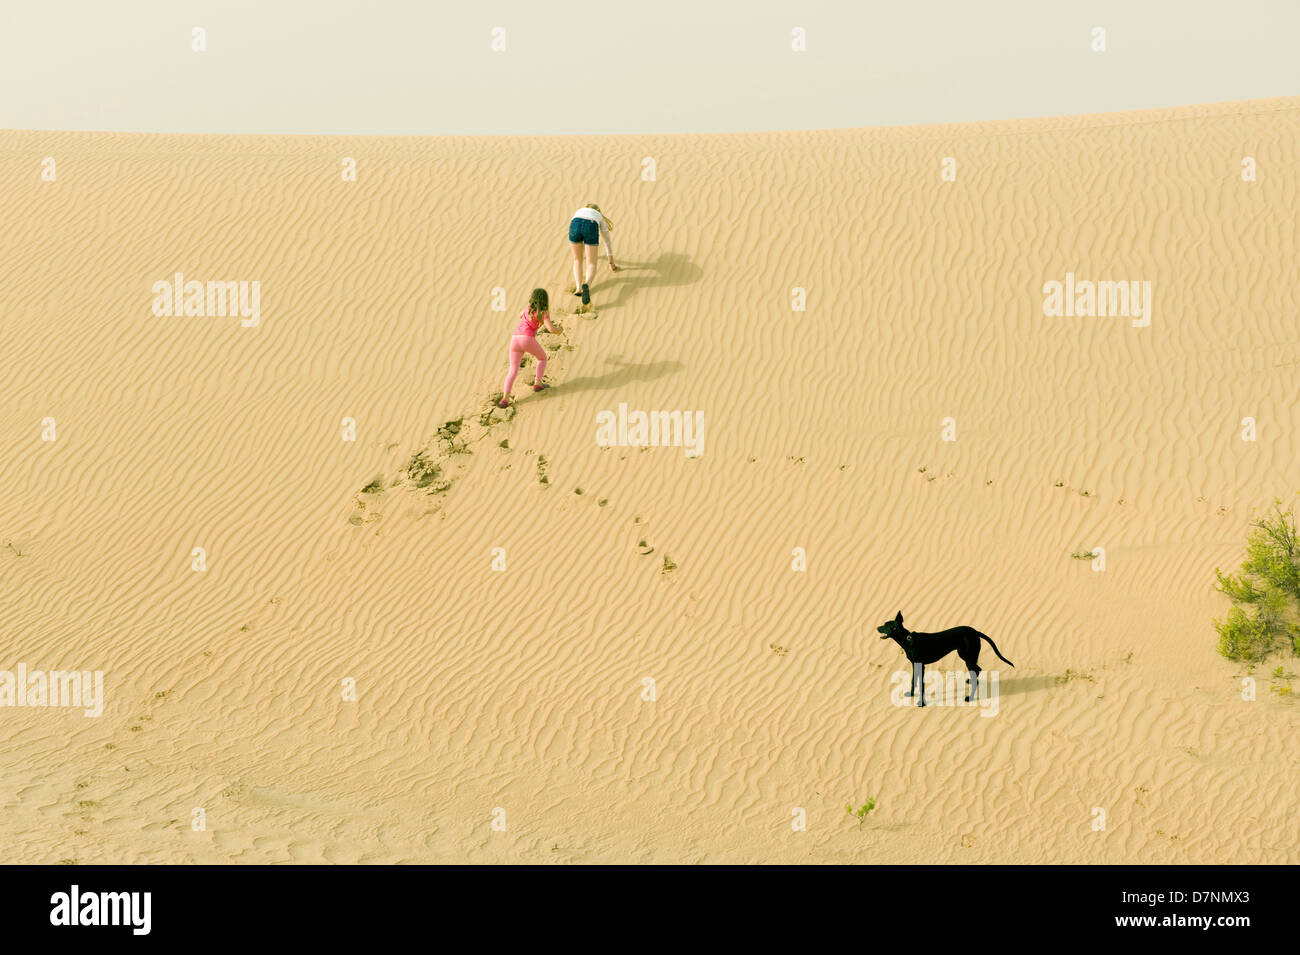 A typical 'desert dog', a black saluki cross and children playing on sand dunes in the desert, Abu Dhabi Stock Photo